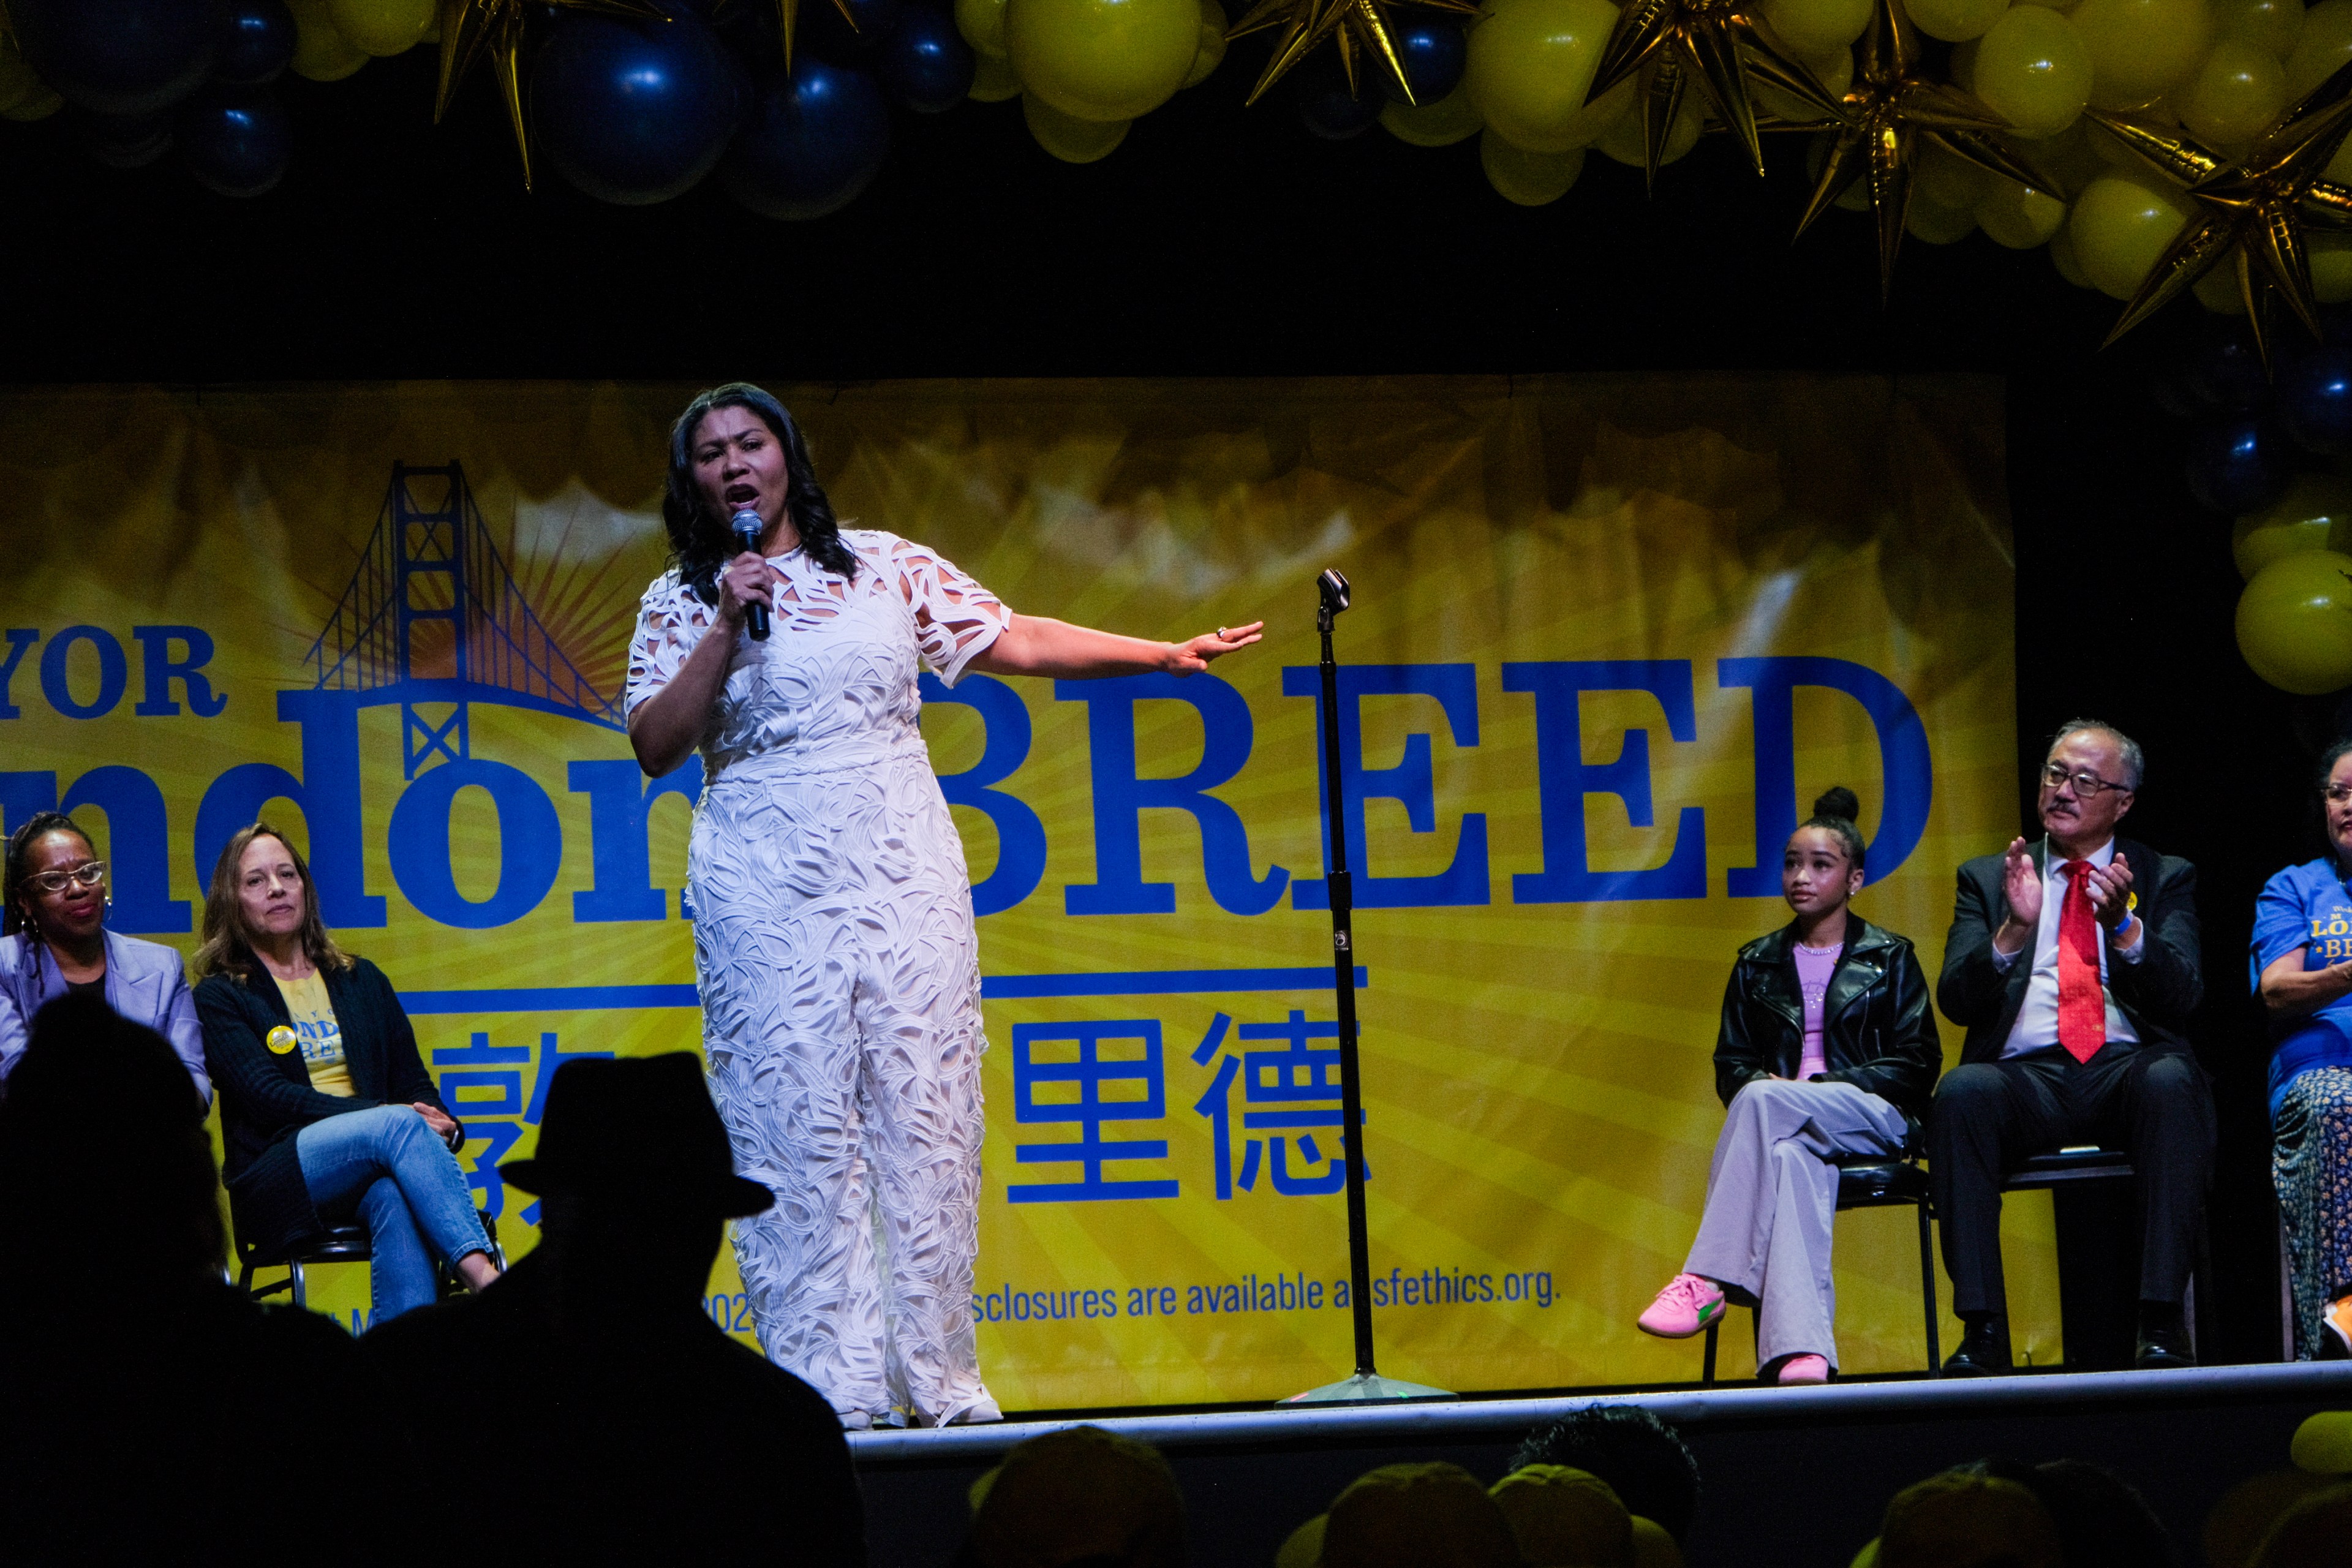 A woman in a white dress is speaking into a microphone on a stage with a yellow banner that reads "London Breed." Several people are seated behind her.